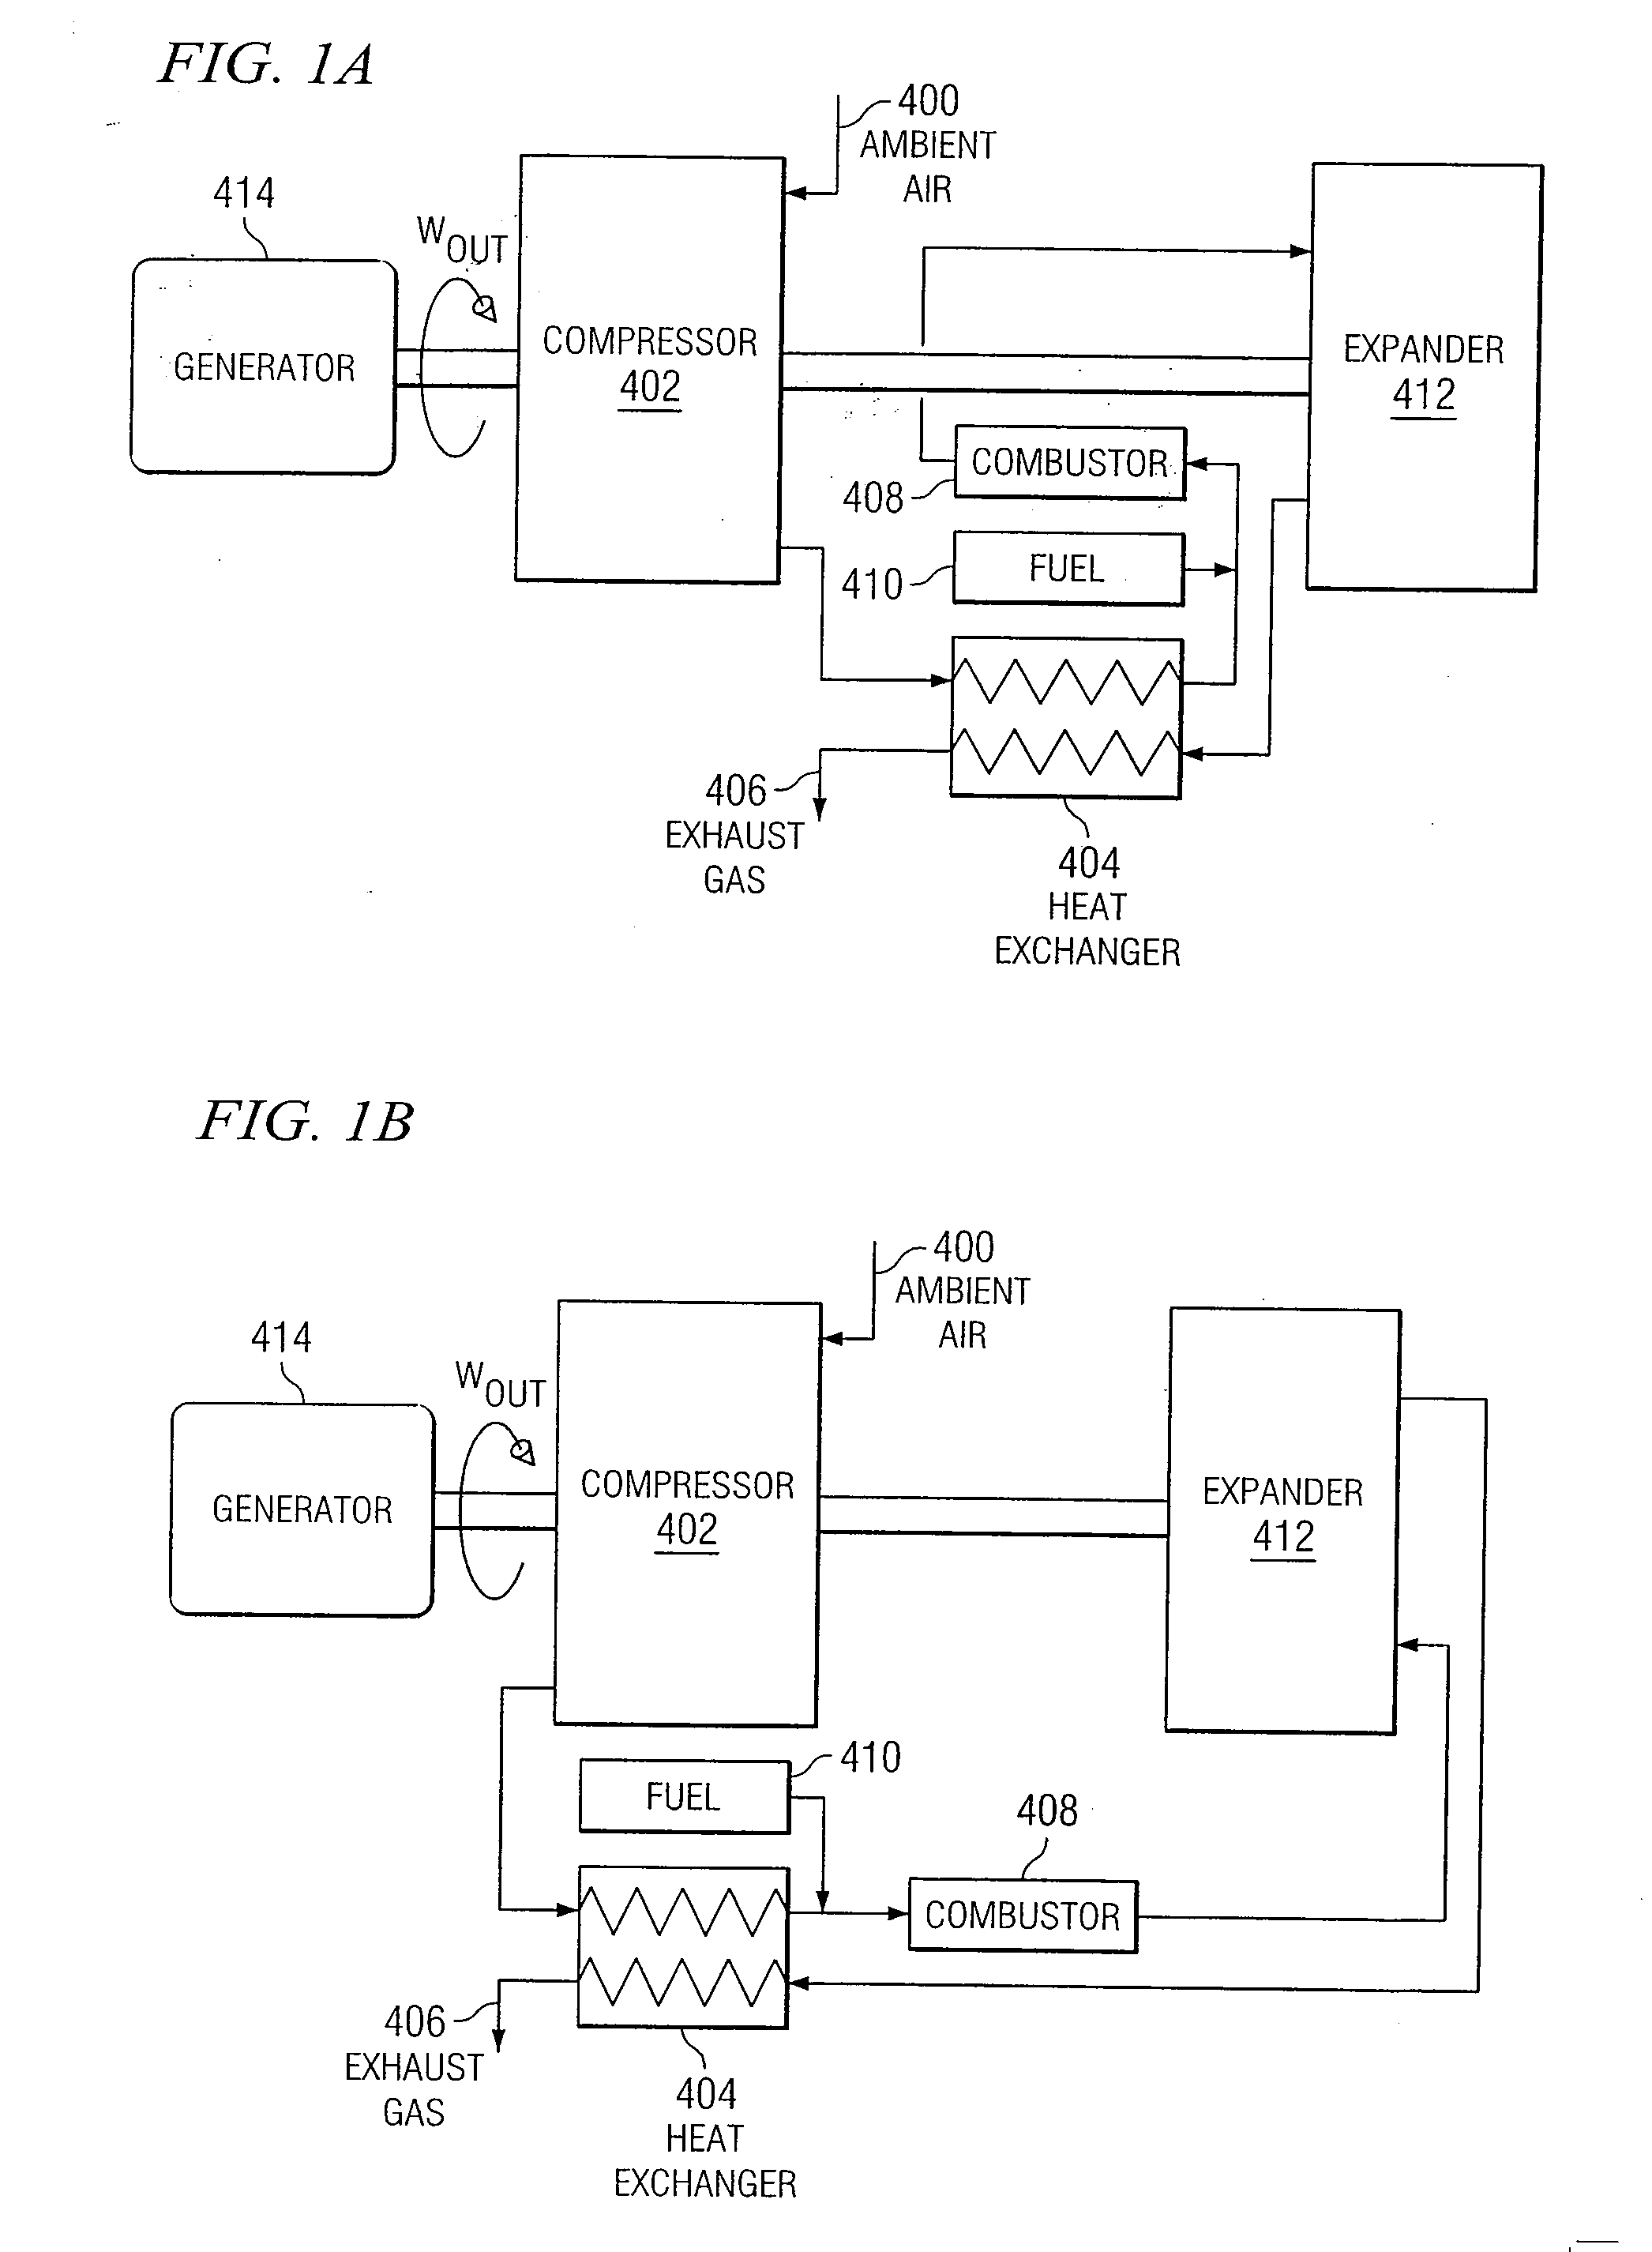 Gerotor Apparatus for a Quasi-Isothermal Brayton Cycle Engine